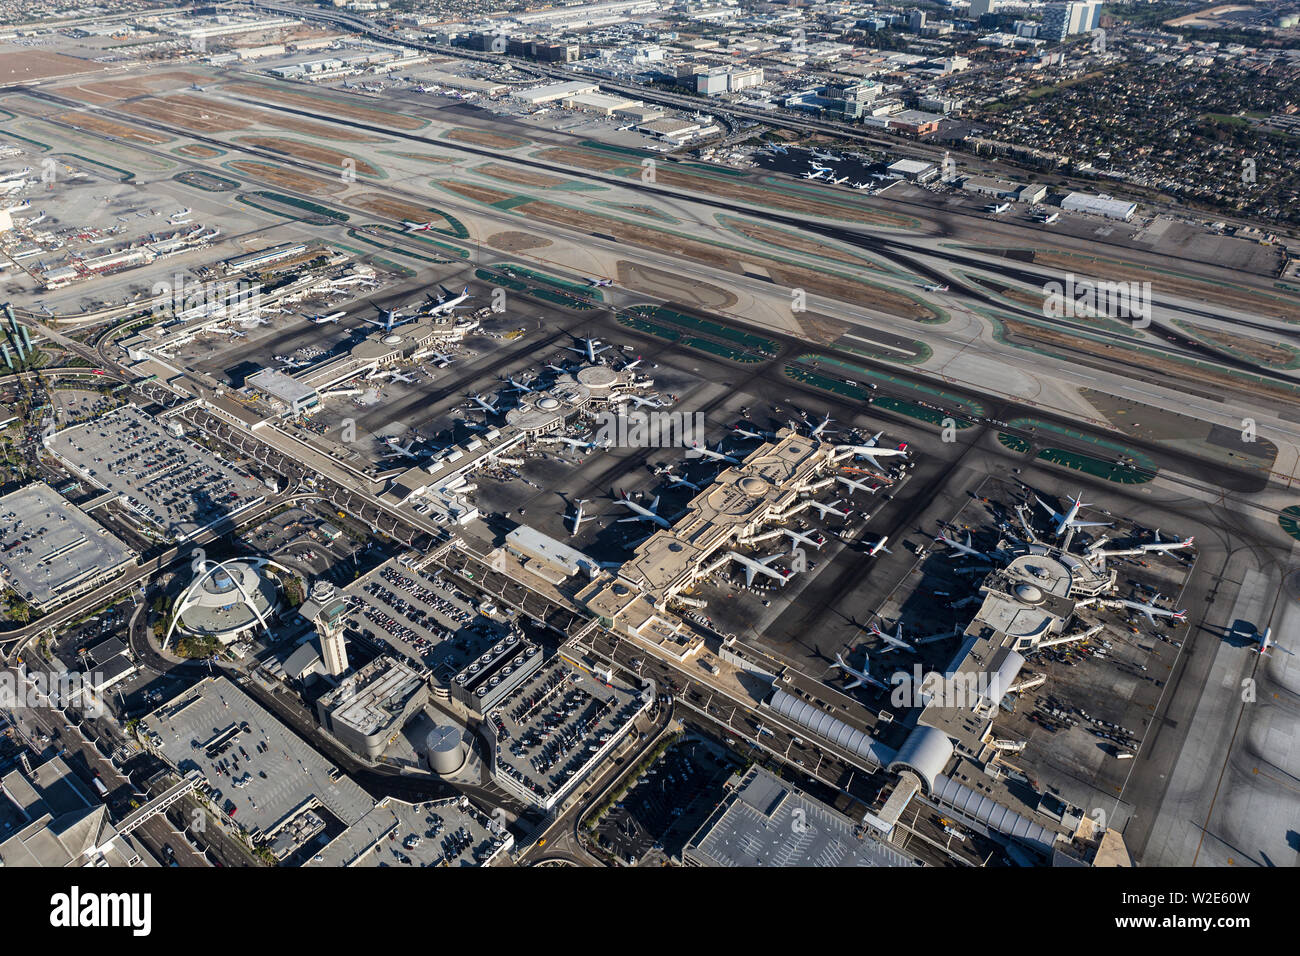 Los Angeles, California, USA - August 16, 2016:  Afternoon aerial view of busy LAX Airport terminals and south runways. Stock Photo